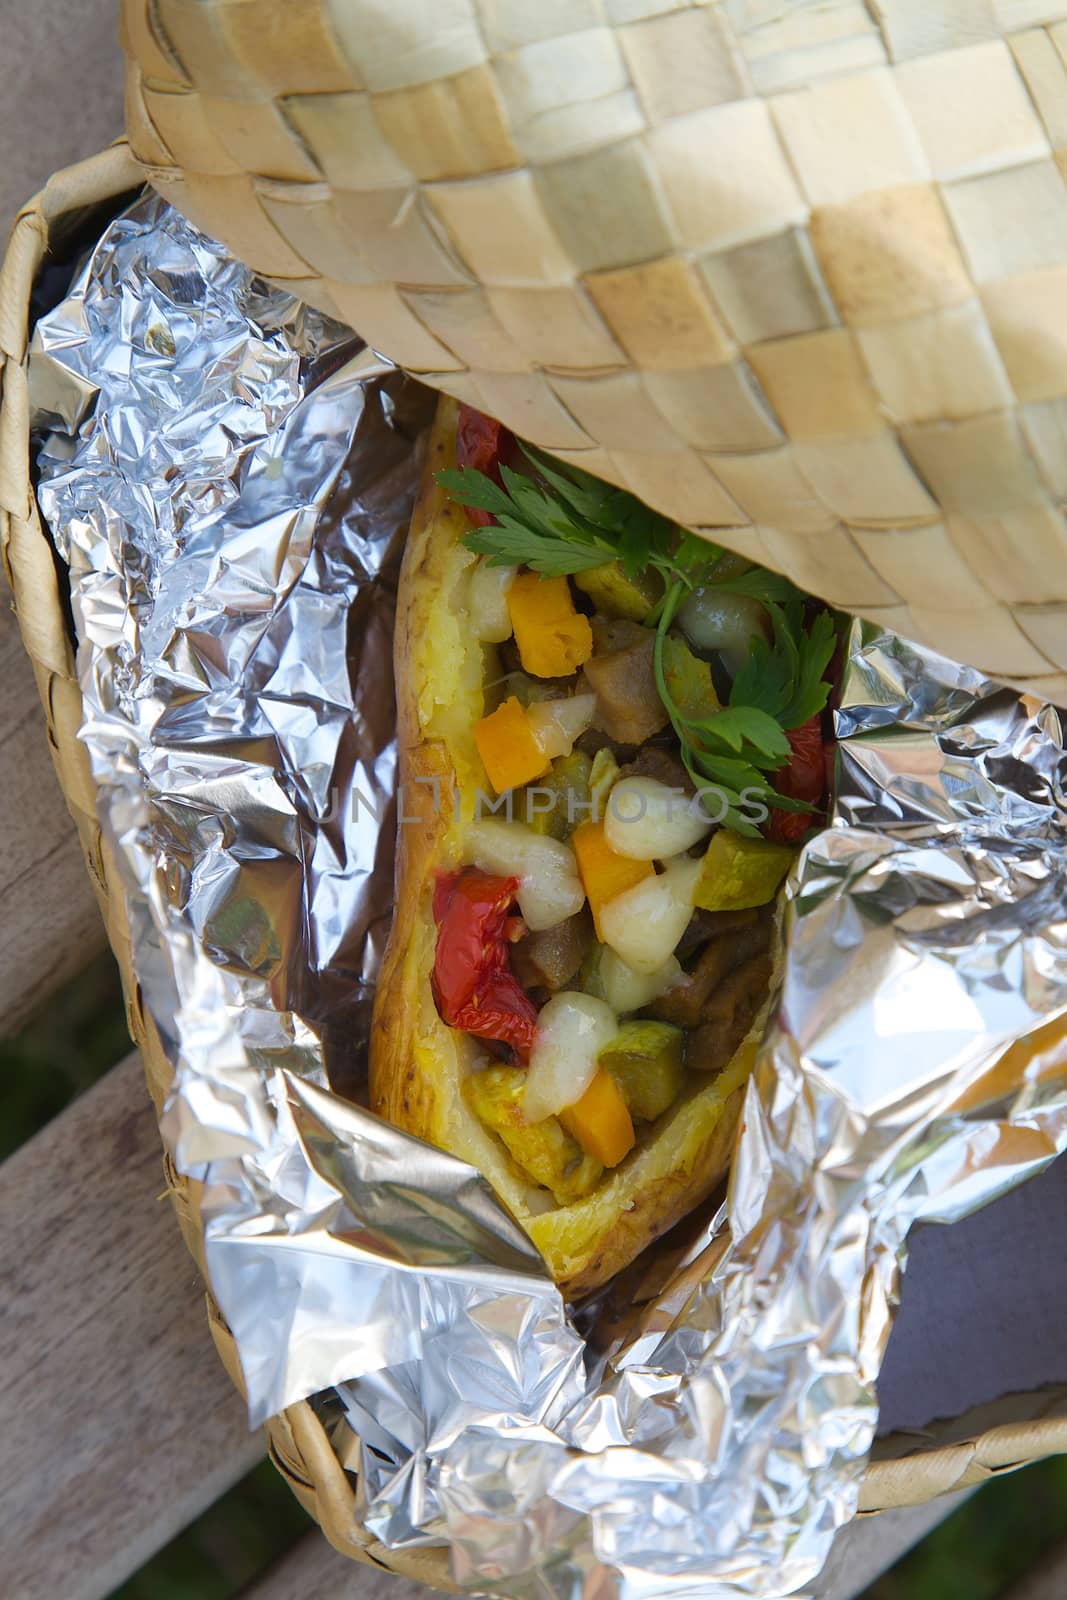 Open-air lunch for a vegetarian- potato baked with vegetables and cheese in an aluminium foil. Dish is hidden in the woven birch basket